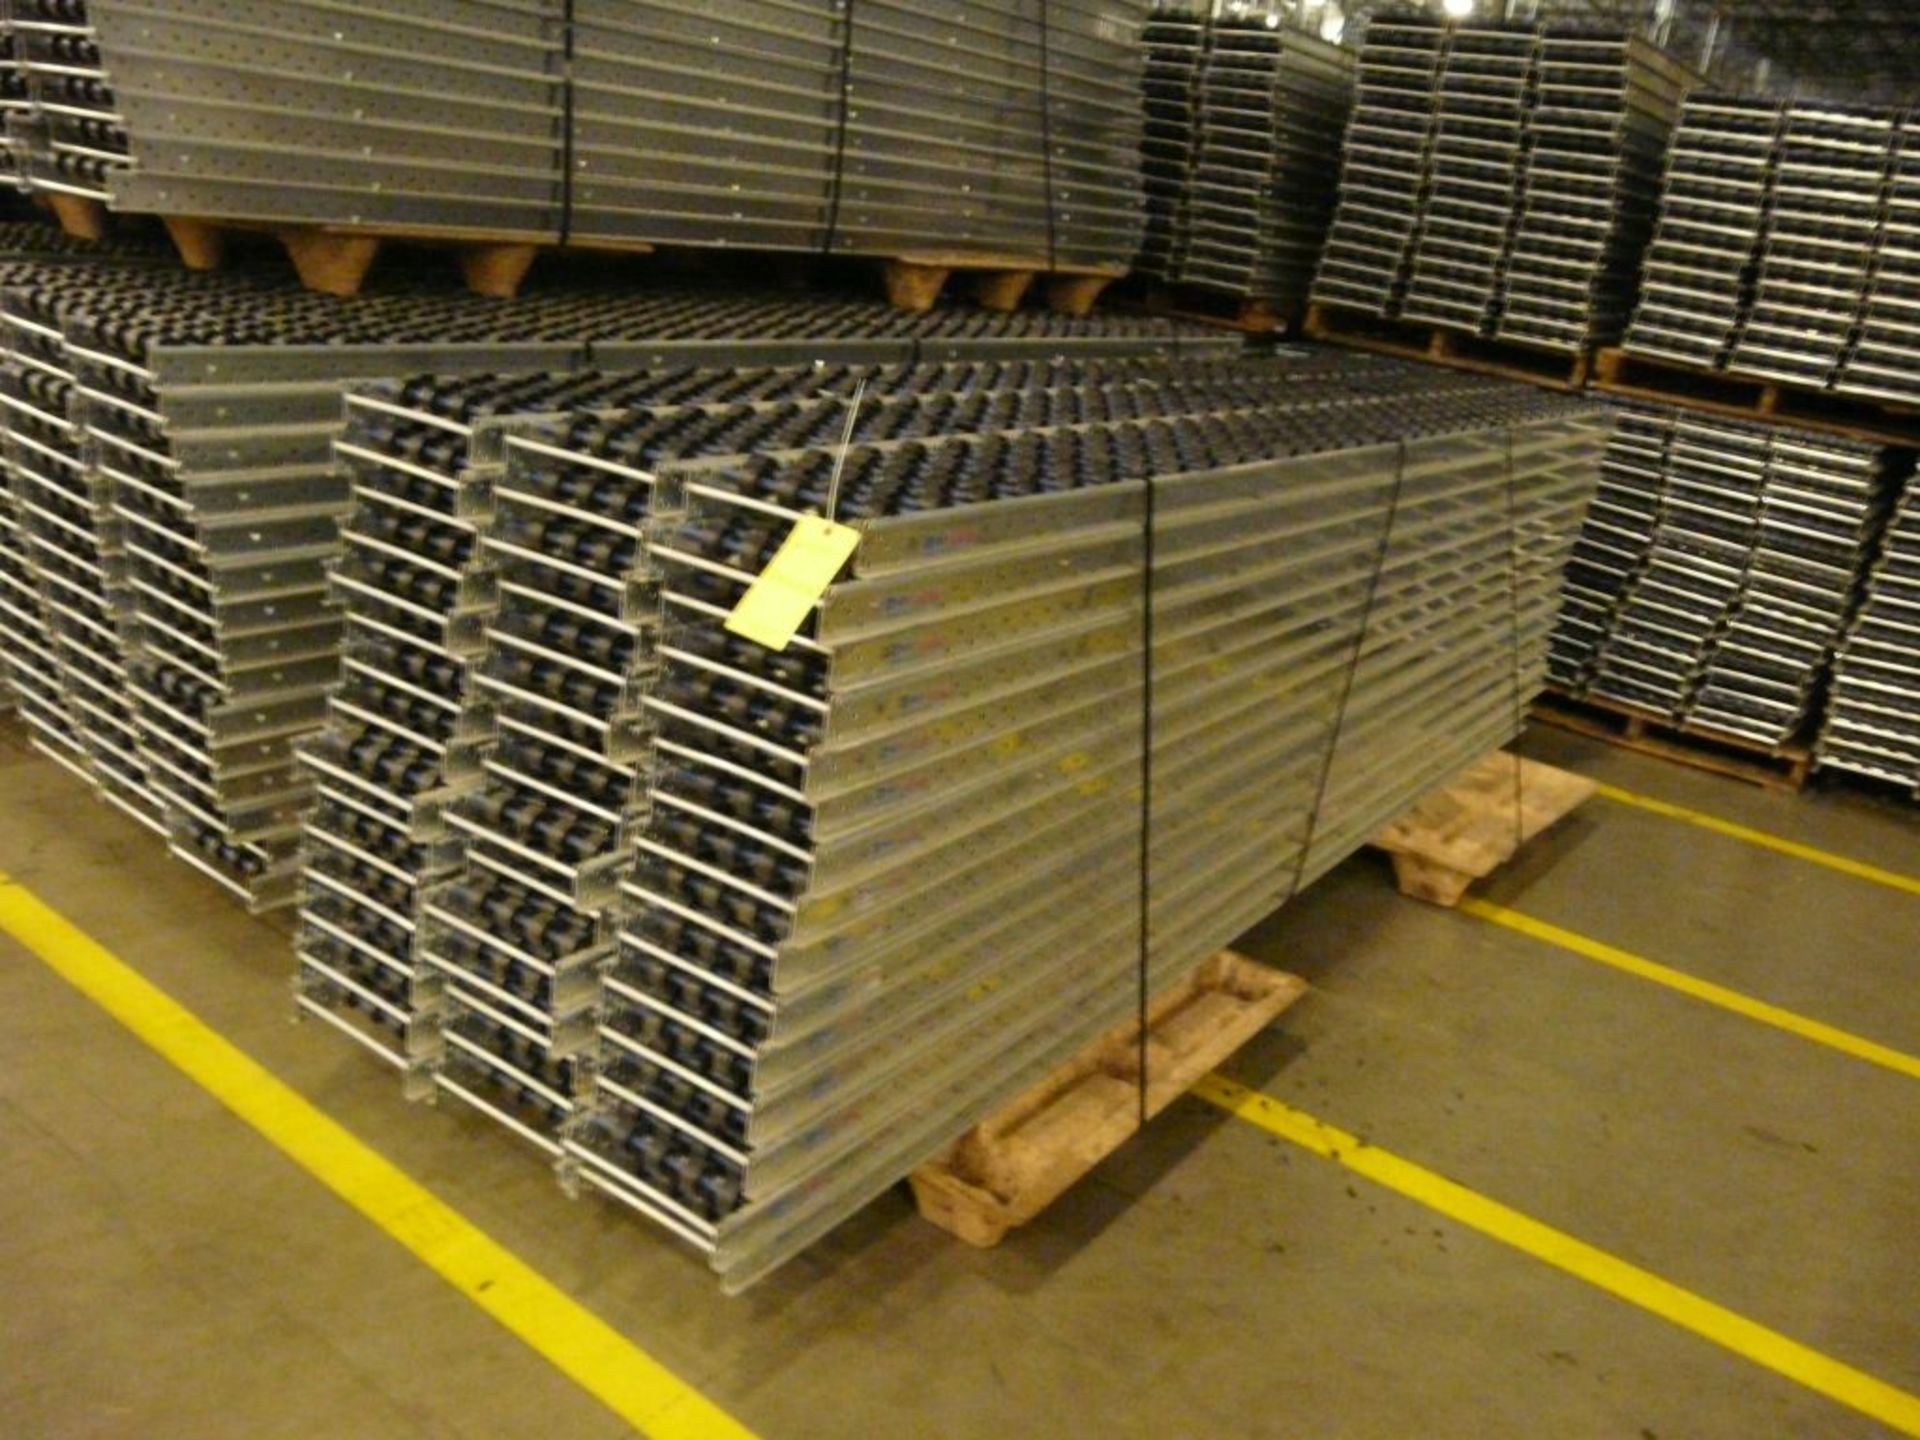 Lot of (90) SpanTrack Wheelbed Carton Flow Conveyors - 11.5'L x 11"W; Tag: 223649 - $30 Lot